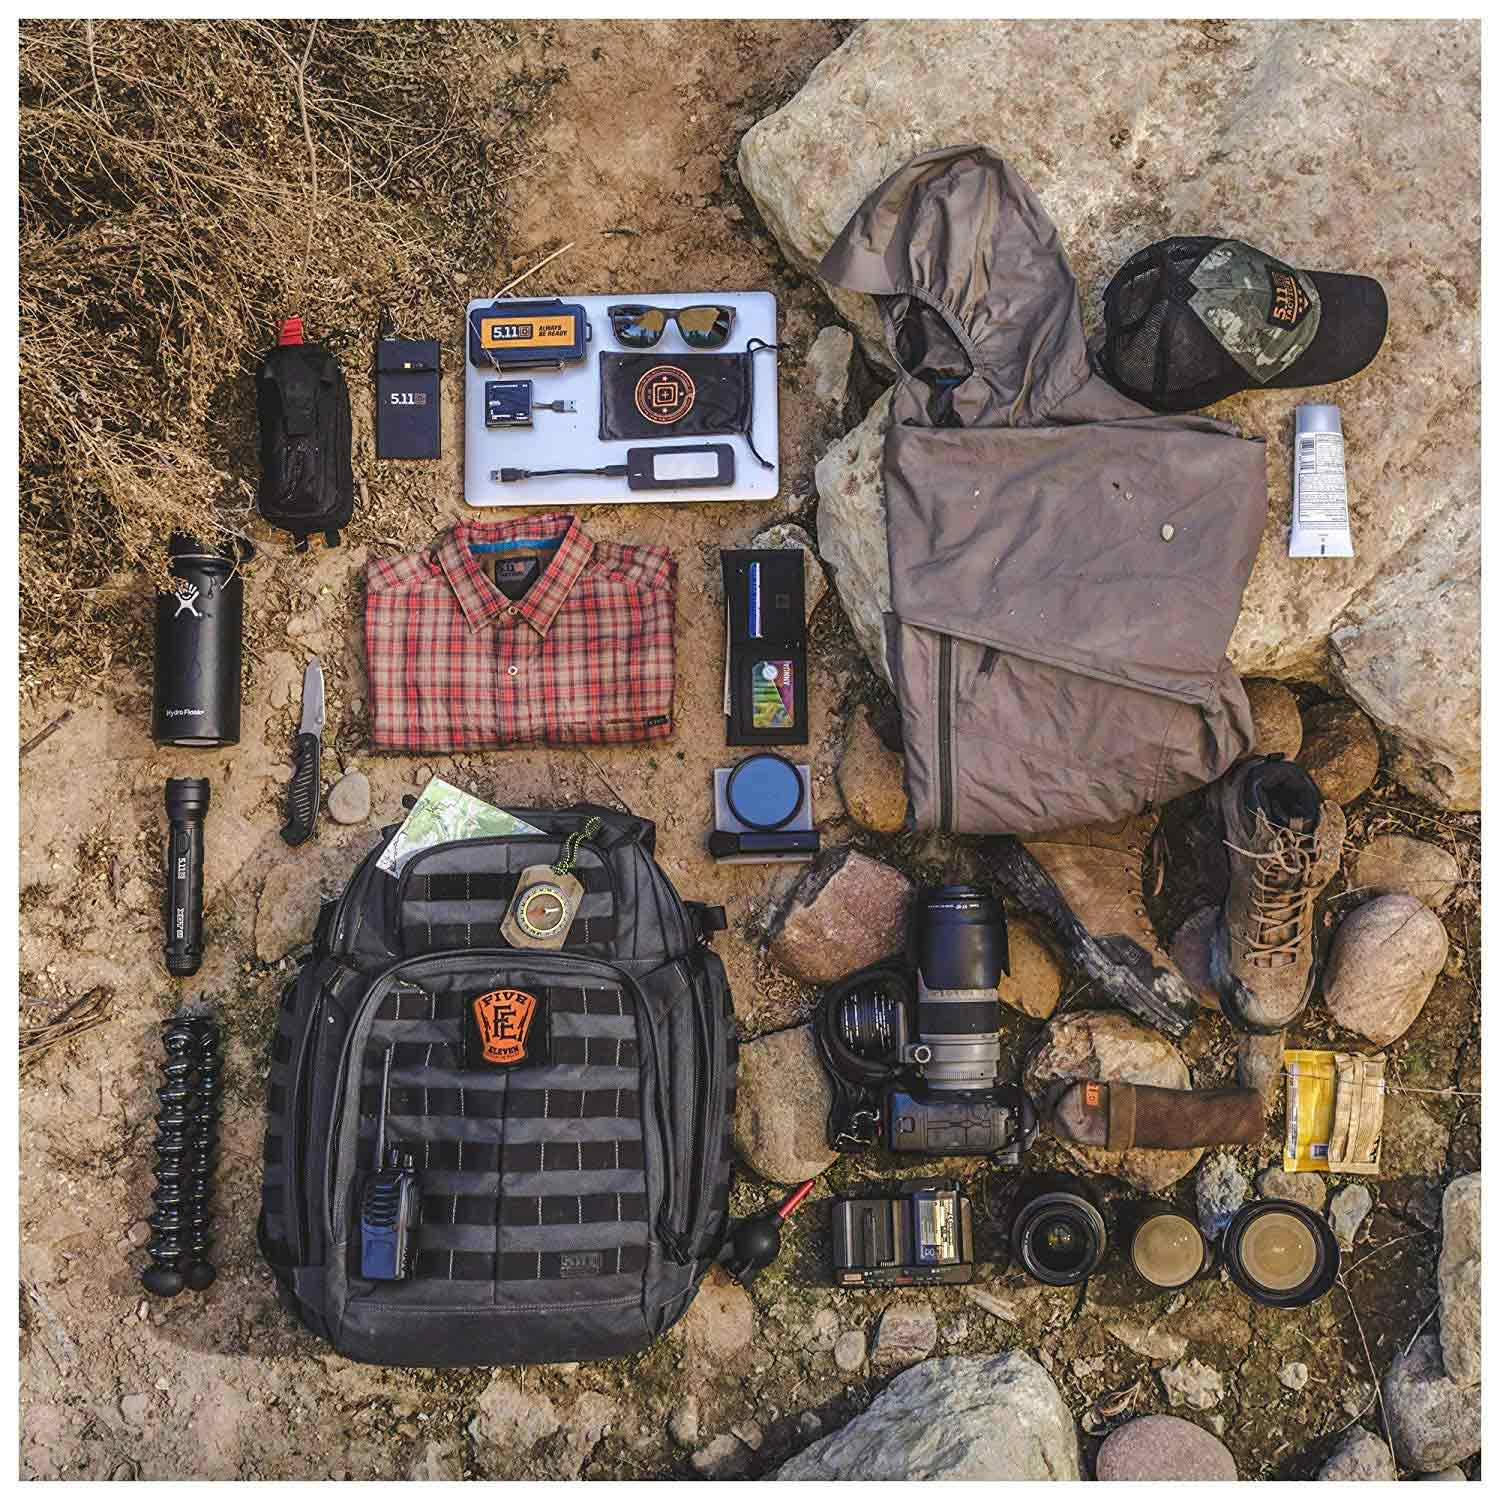 3 Key Features You Need in a Bug-Out Bag